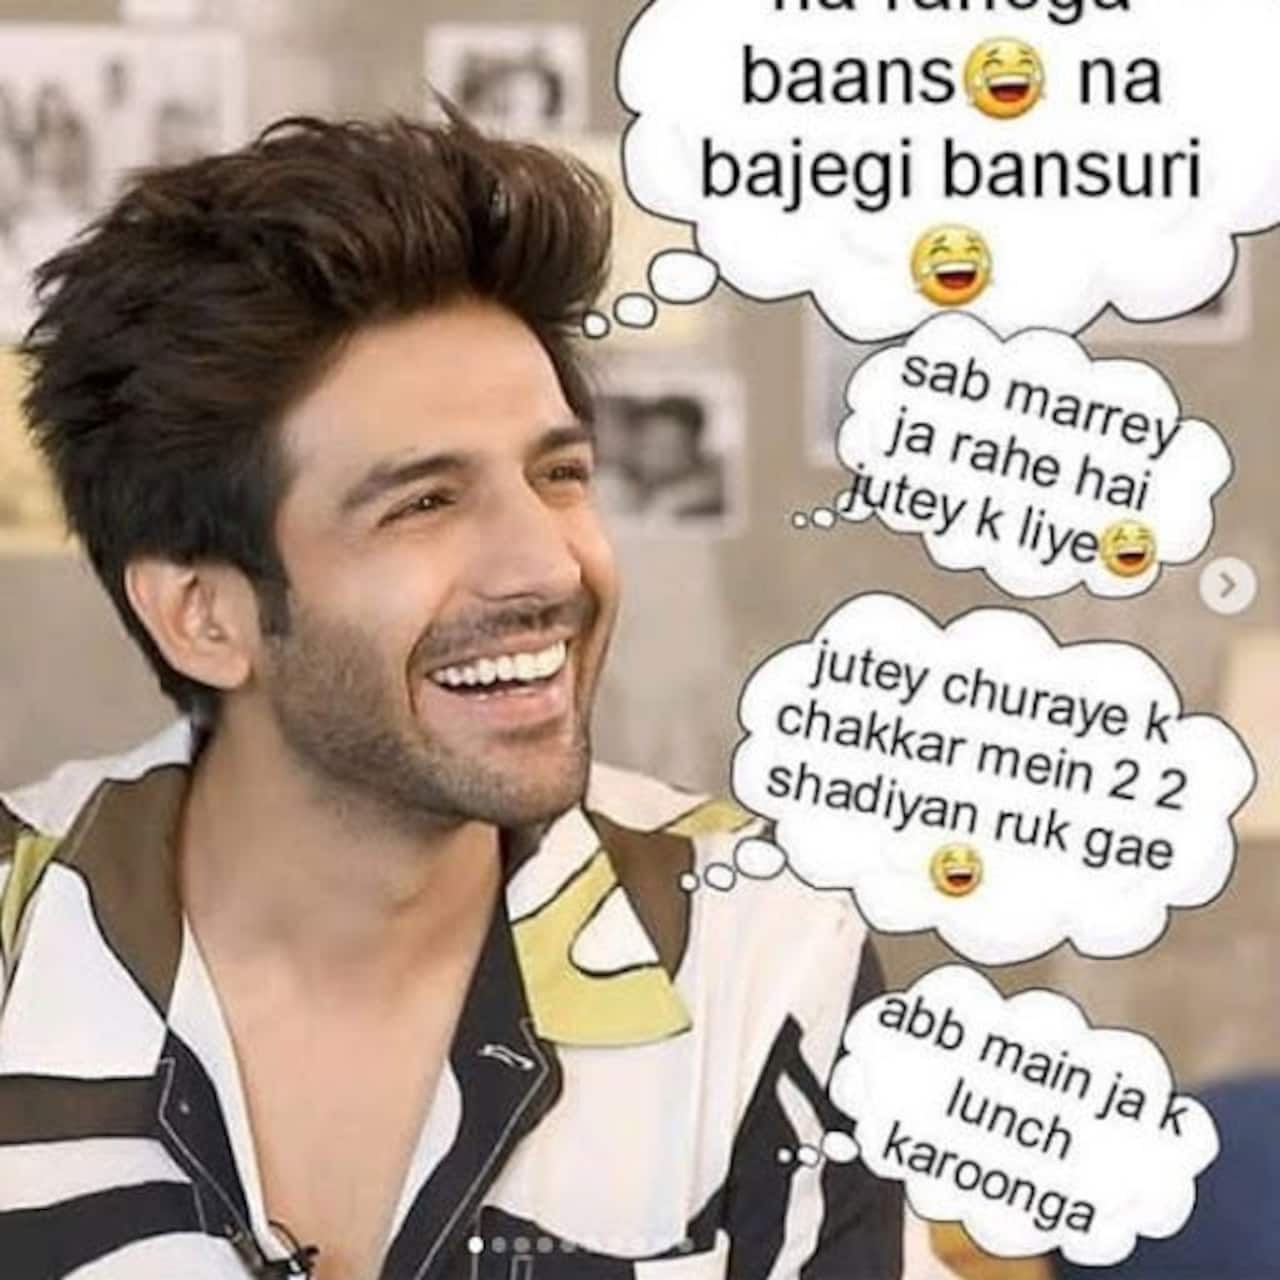 Monday Memes: Kartik Aaryan's imaginary conversations with different people  are too hilarious to miss